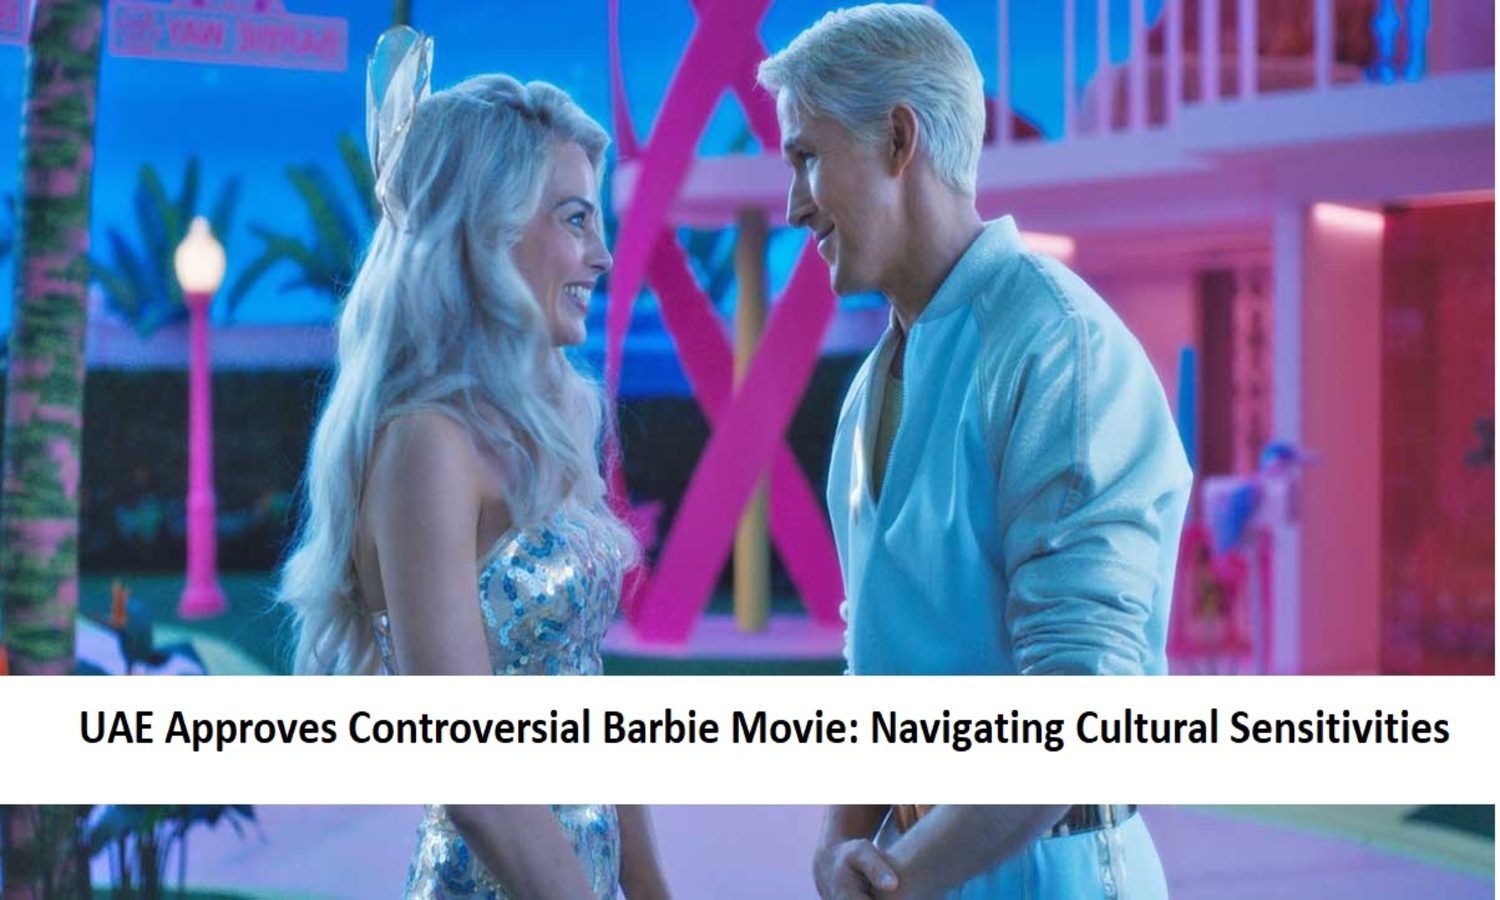 UAE Approves Controversial Barbie Movie Navigating Cultural Sensitivities